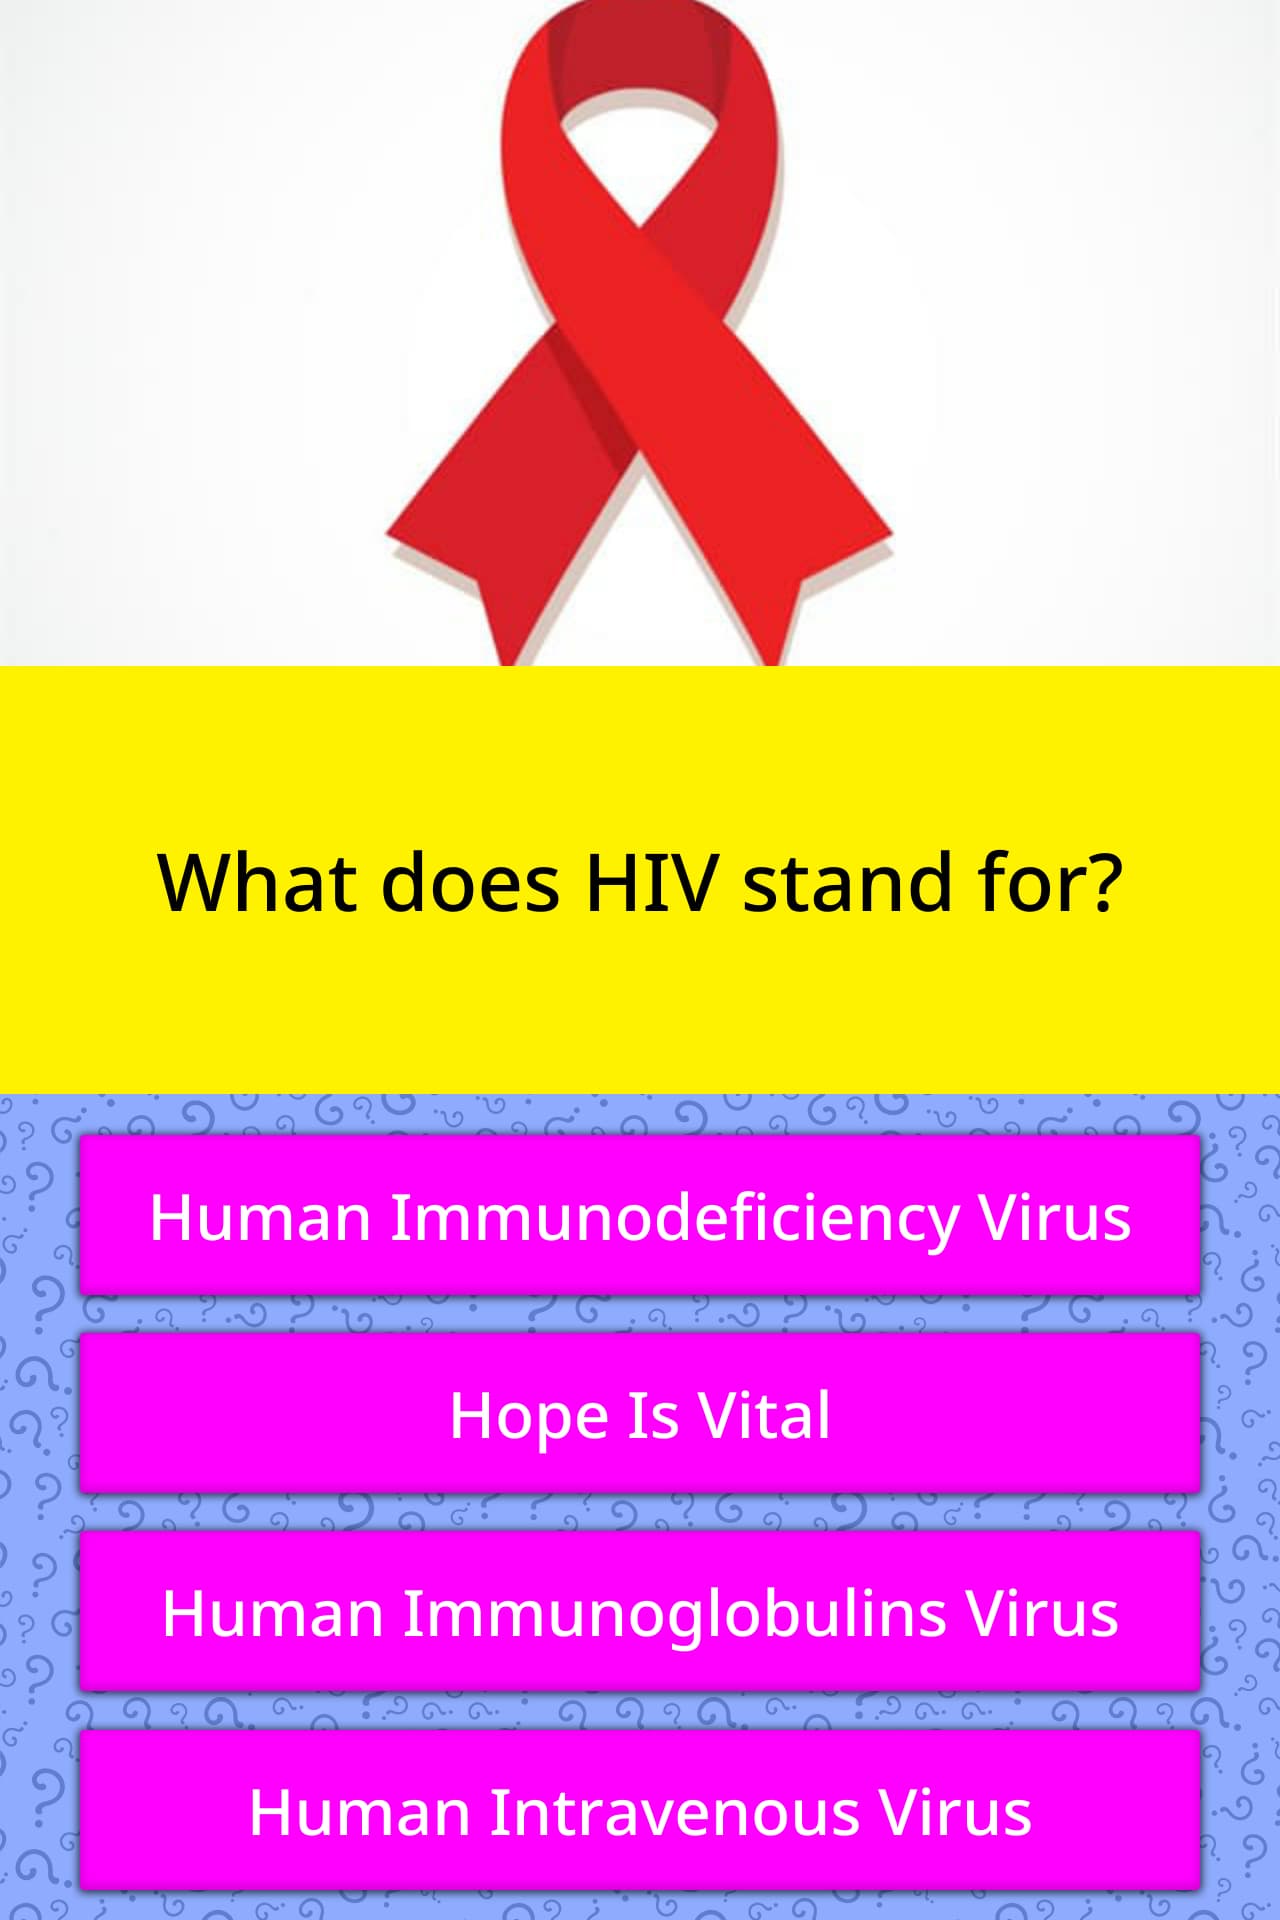 What does HIV stand for?